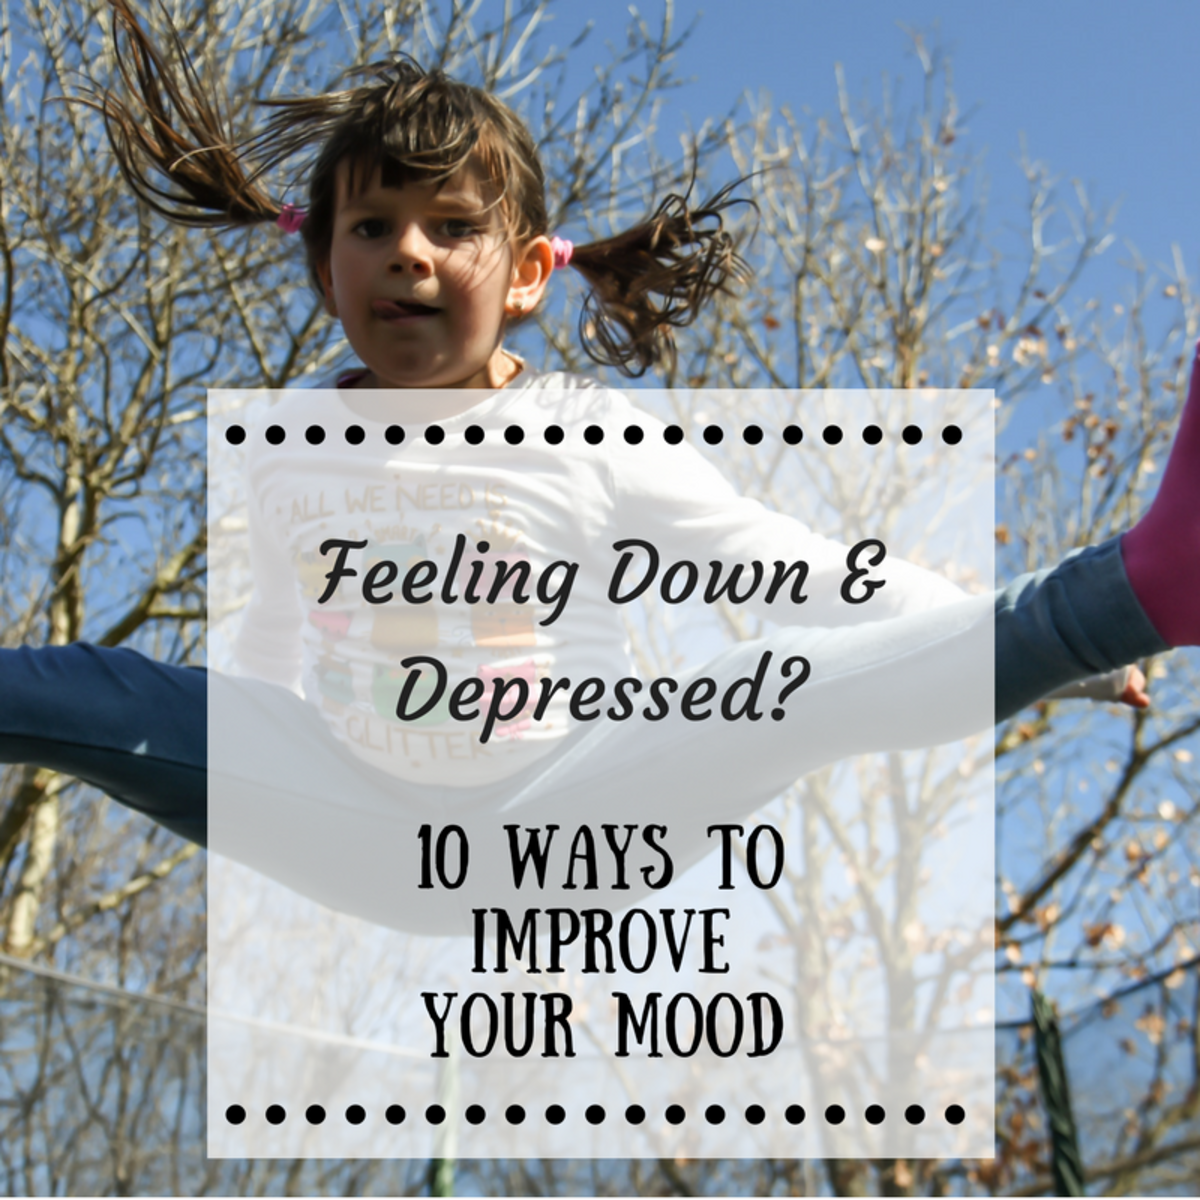 Feeling Down and Depressed? 10 Simple Ways to Improve Your Mood